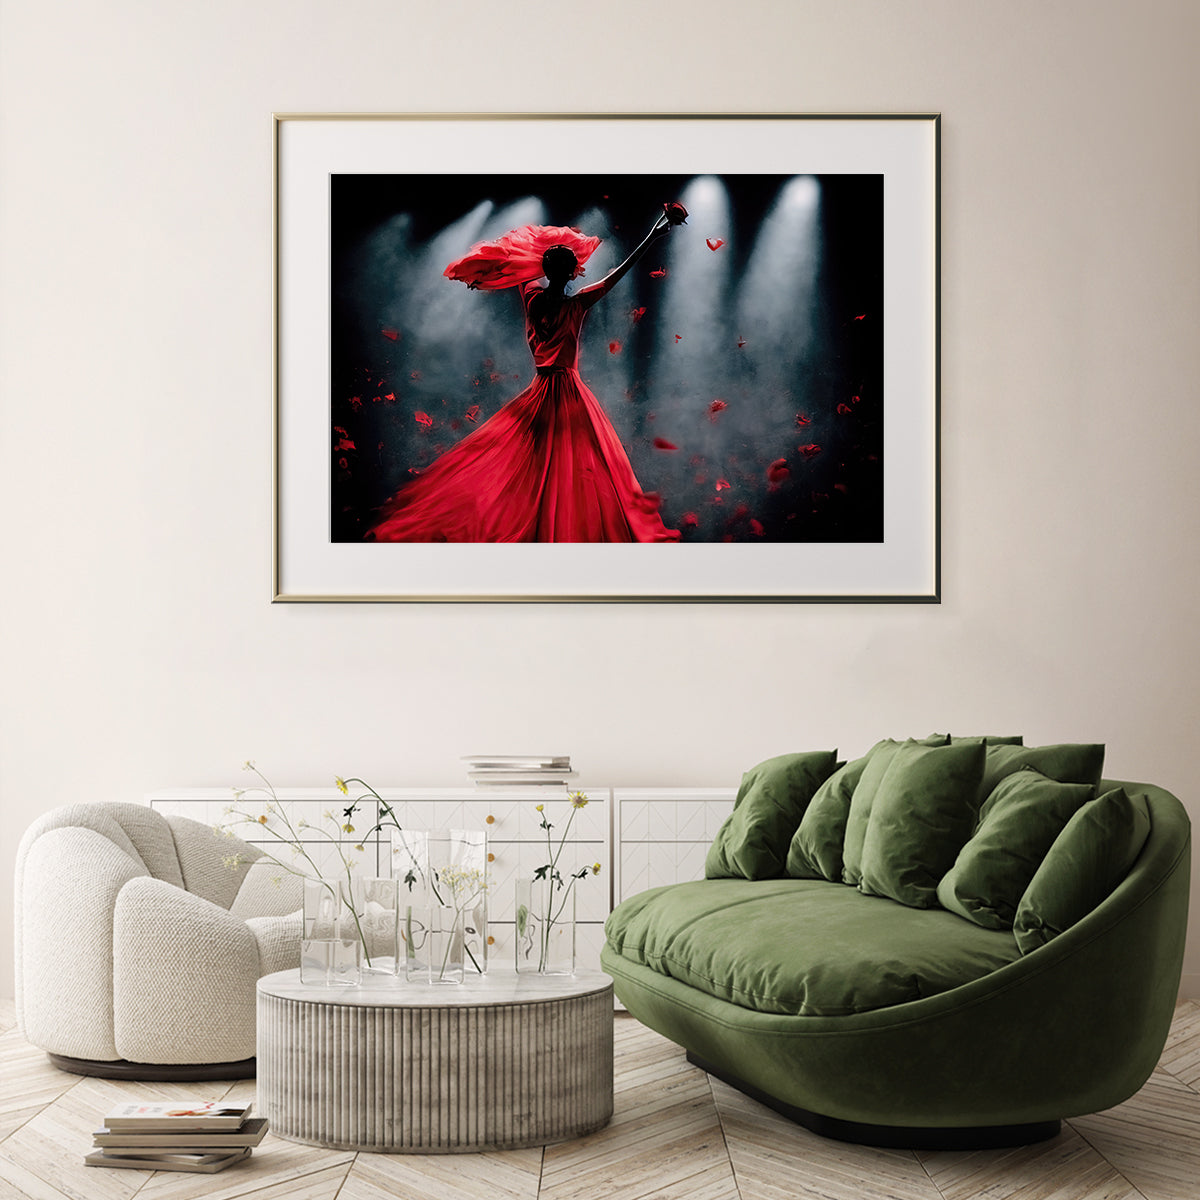 Silhouette of Dancing Woman in Red Dress Large Poster Prints-Horizontal Posters NOT FRAMED-CetArt-10″x8″ inches-CetArt